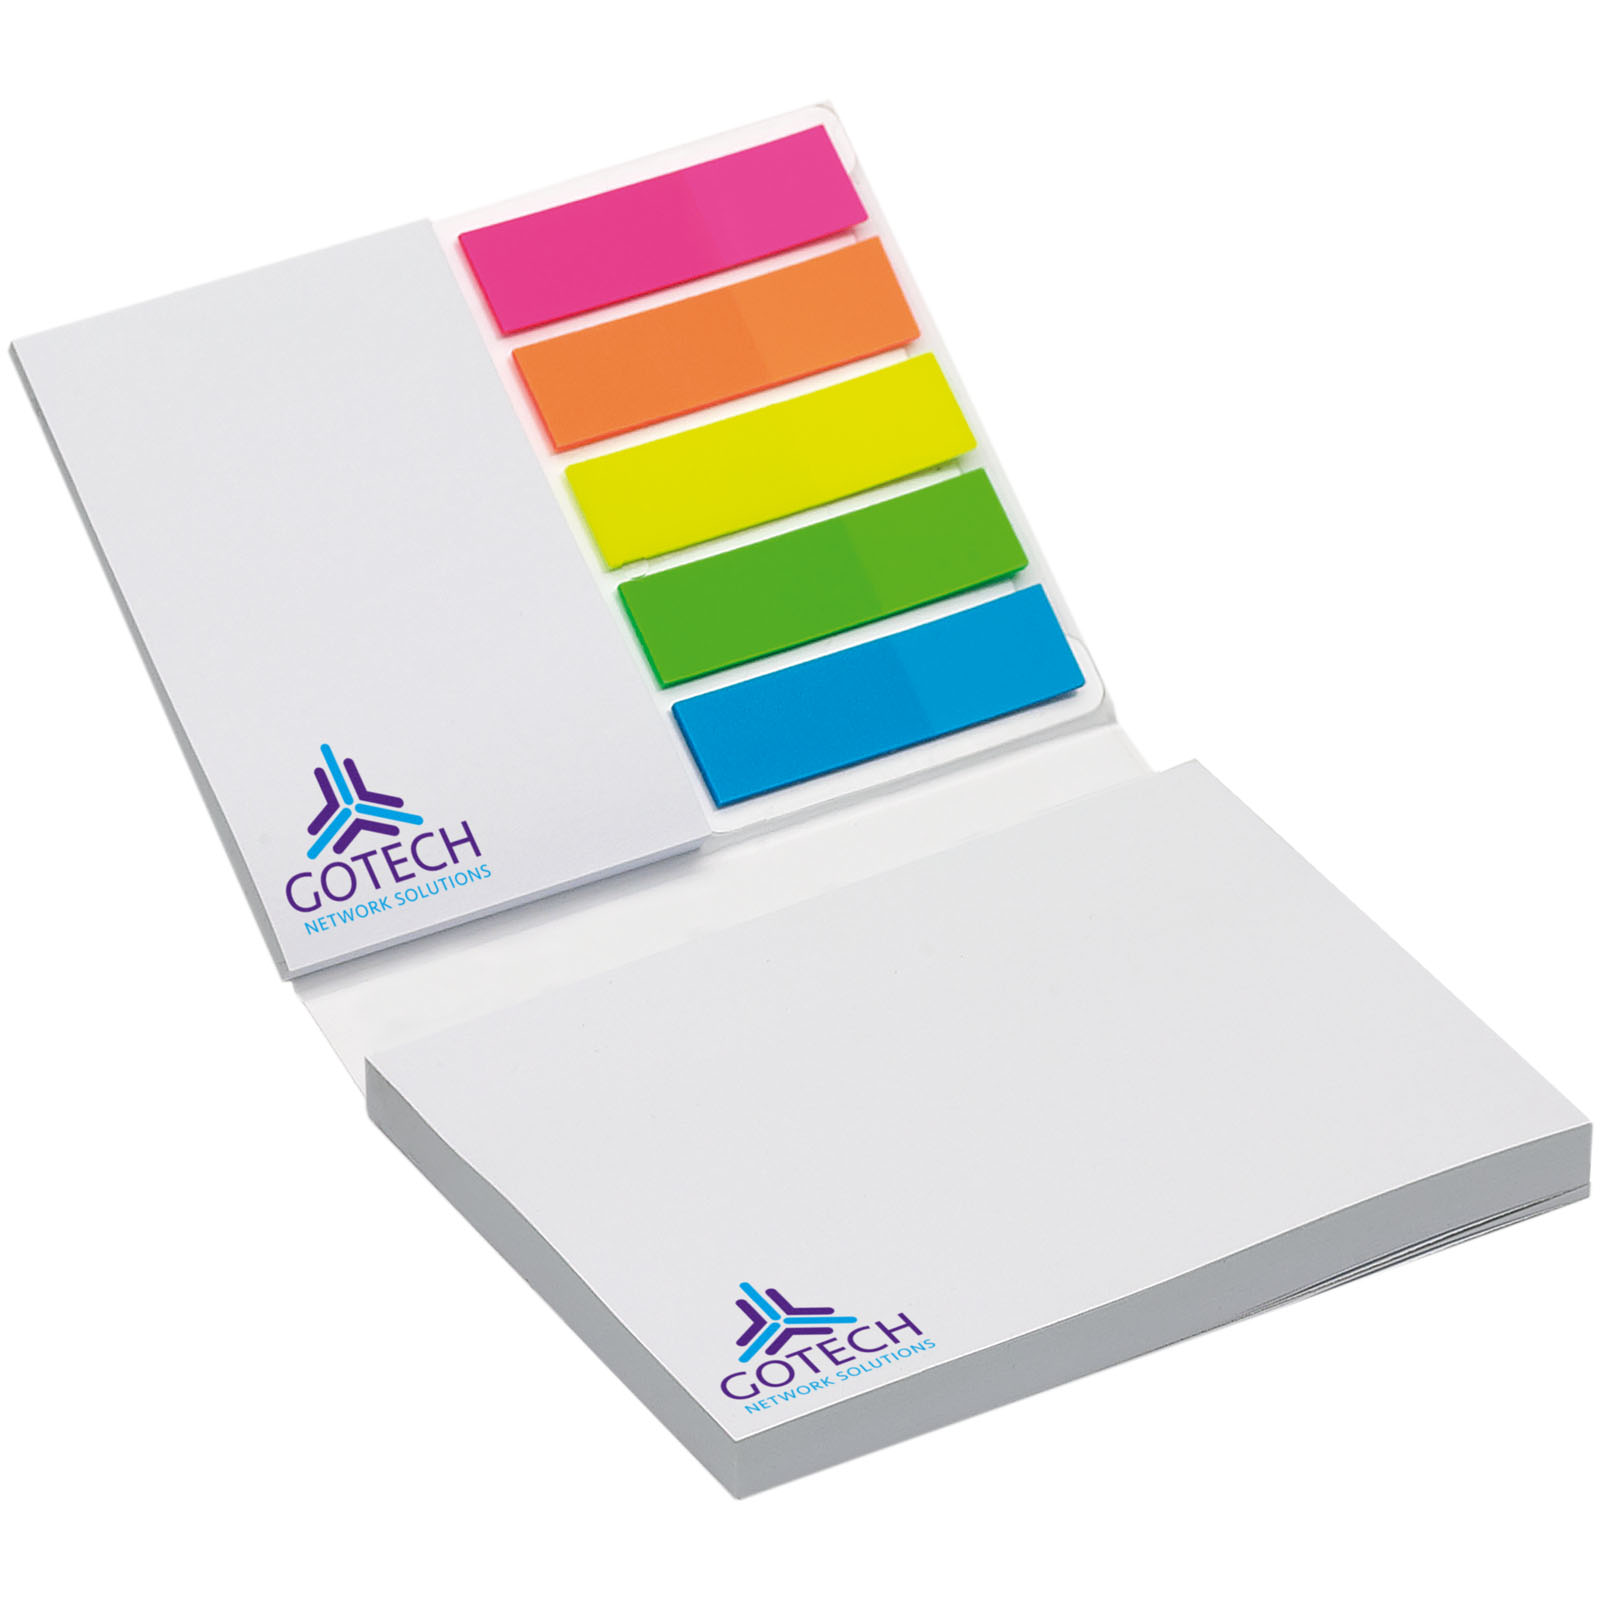 Advertising Sticky Notes - Combi notes marker set soft cover - 2